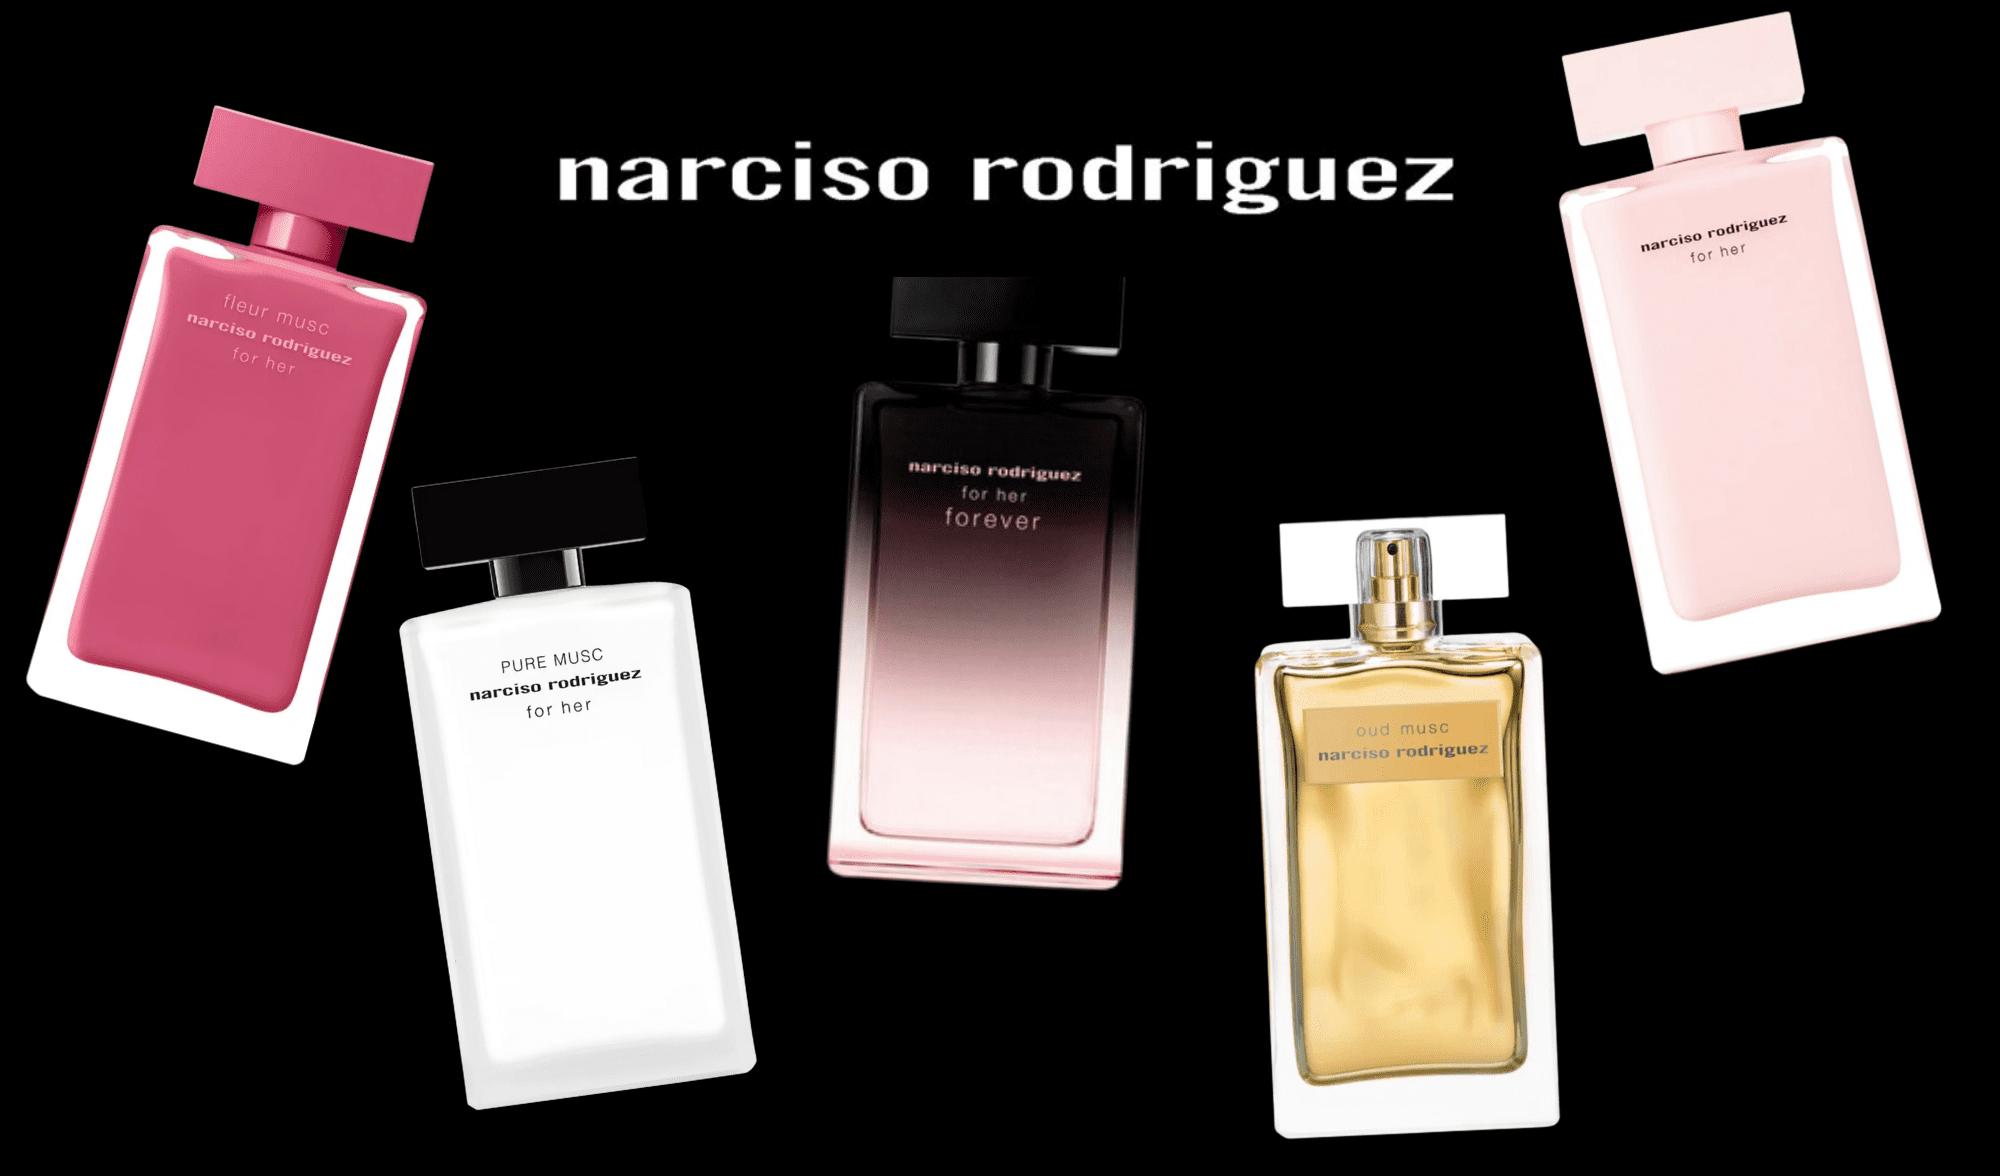 A Guide To The Narciso Rodriguez For Her Perfume Range